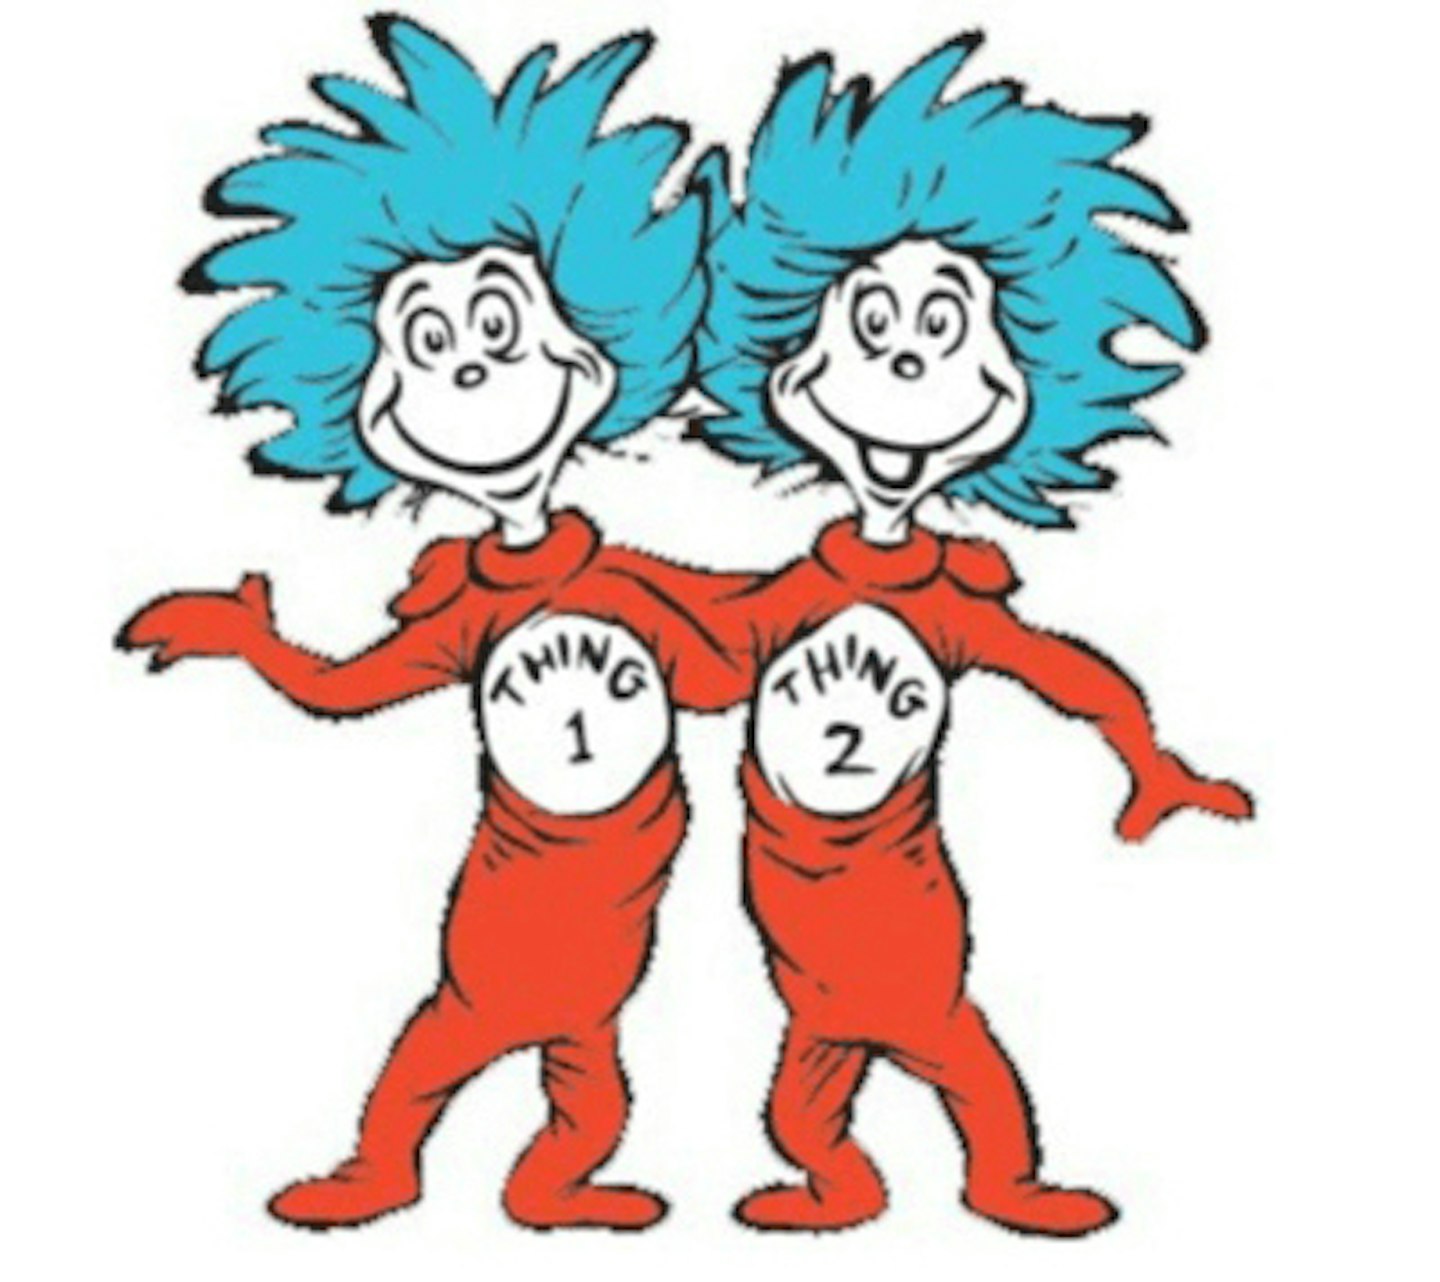 thing-1-thing-2-dr-seuss-cat-in-the-hat-world-book-day-outfits-costumes-ideas